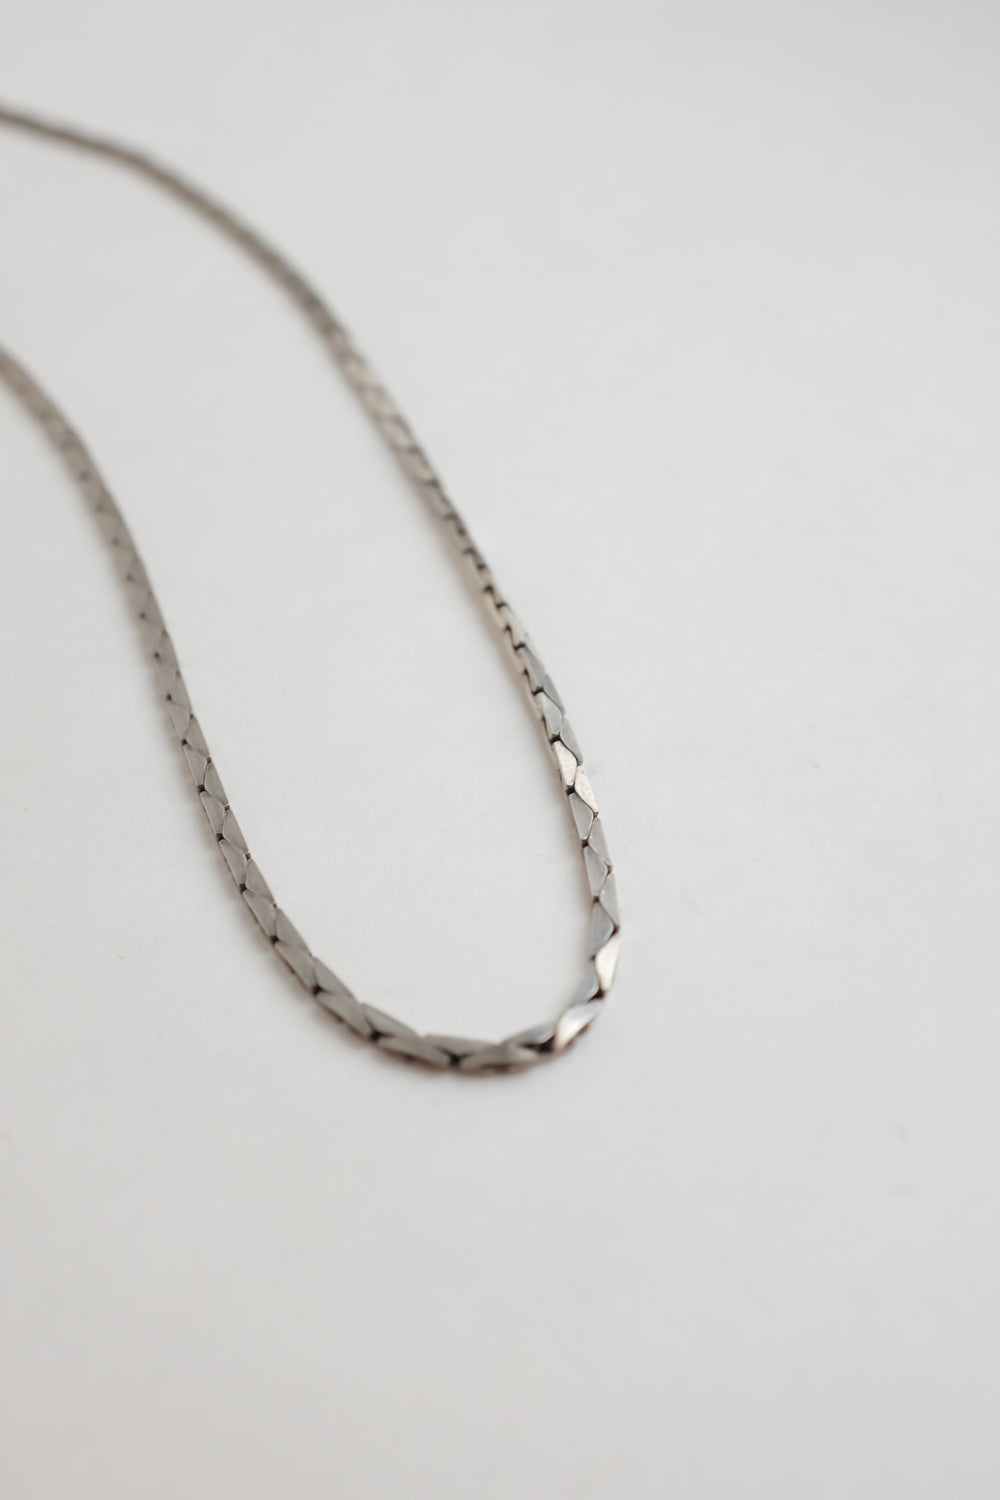 CLASSY STERLING SILVER 925 VINTAGE NECKLACE